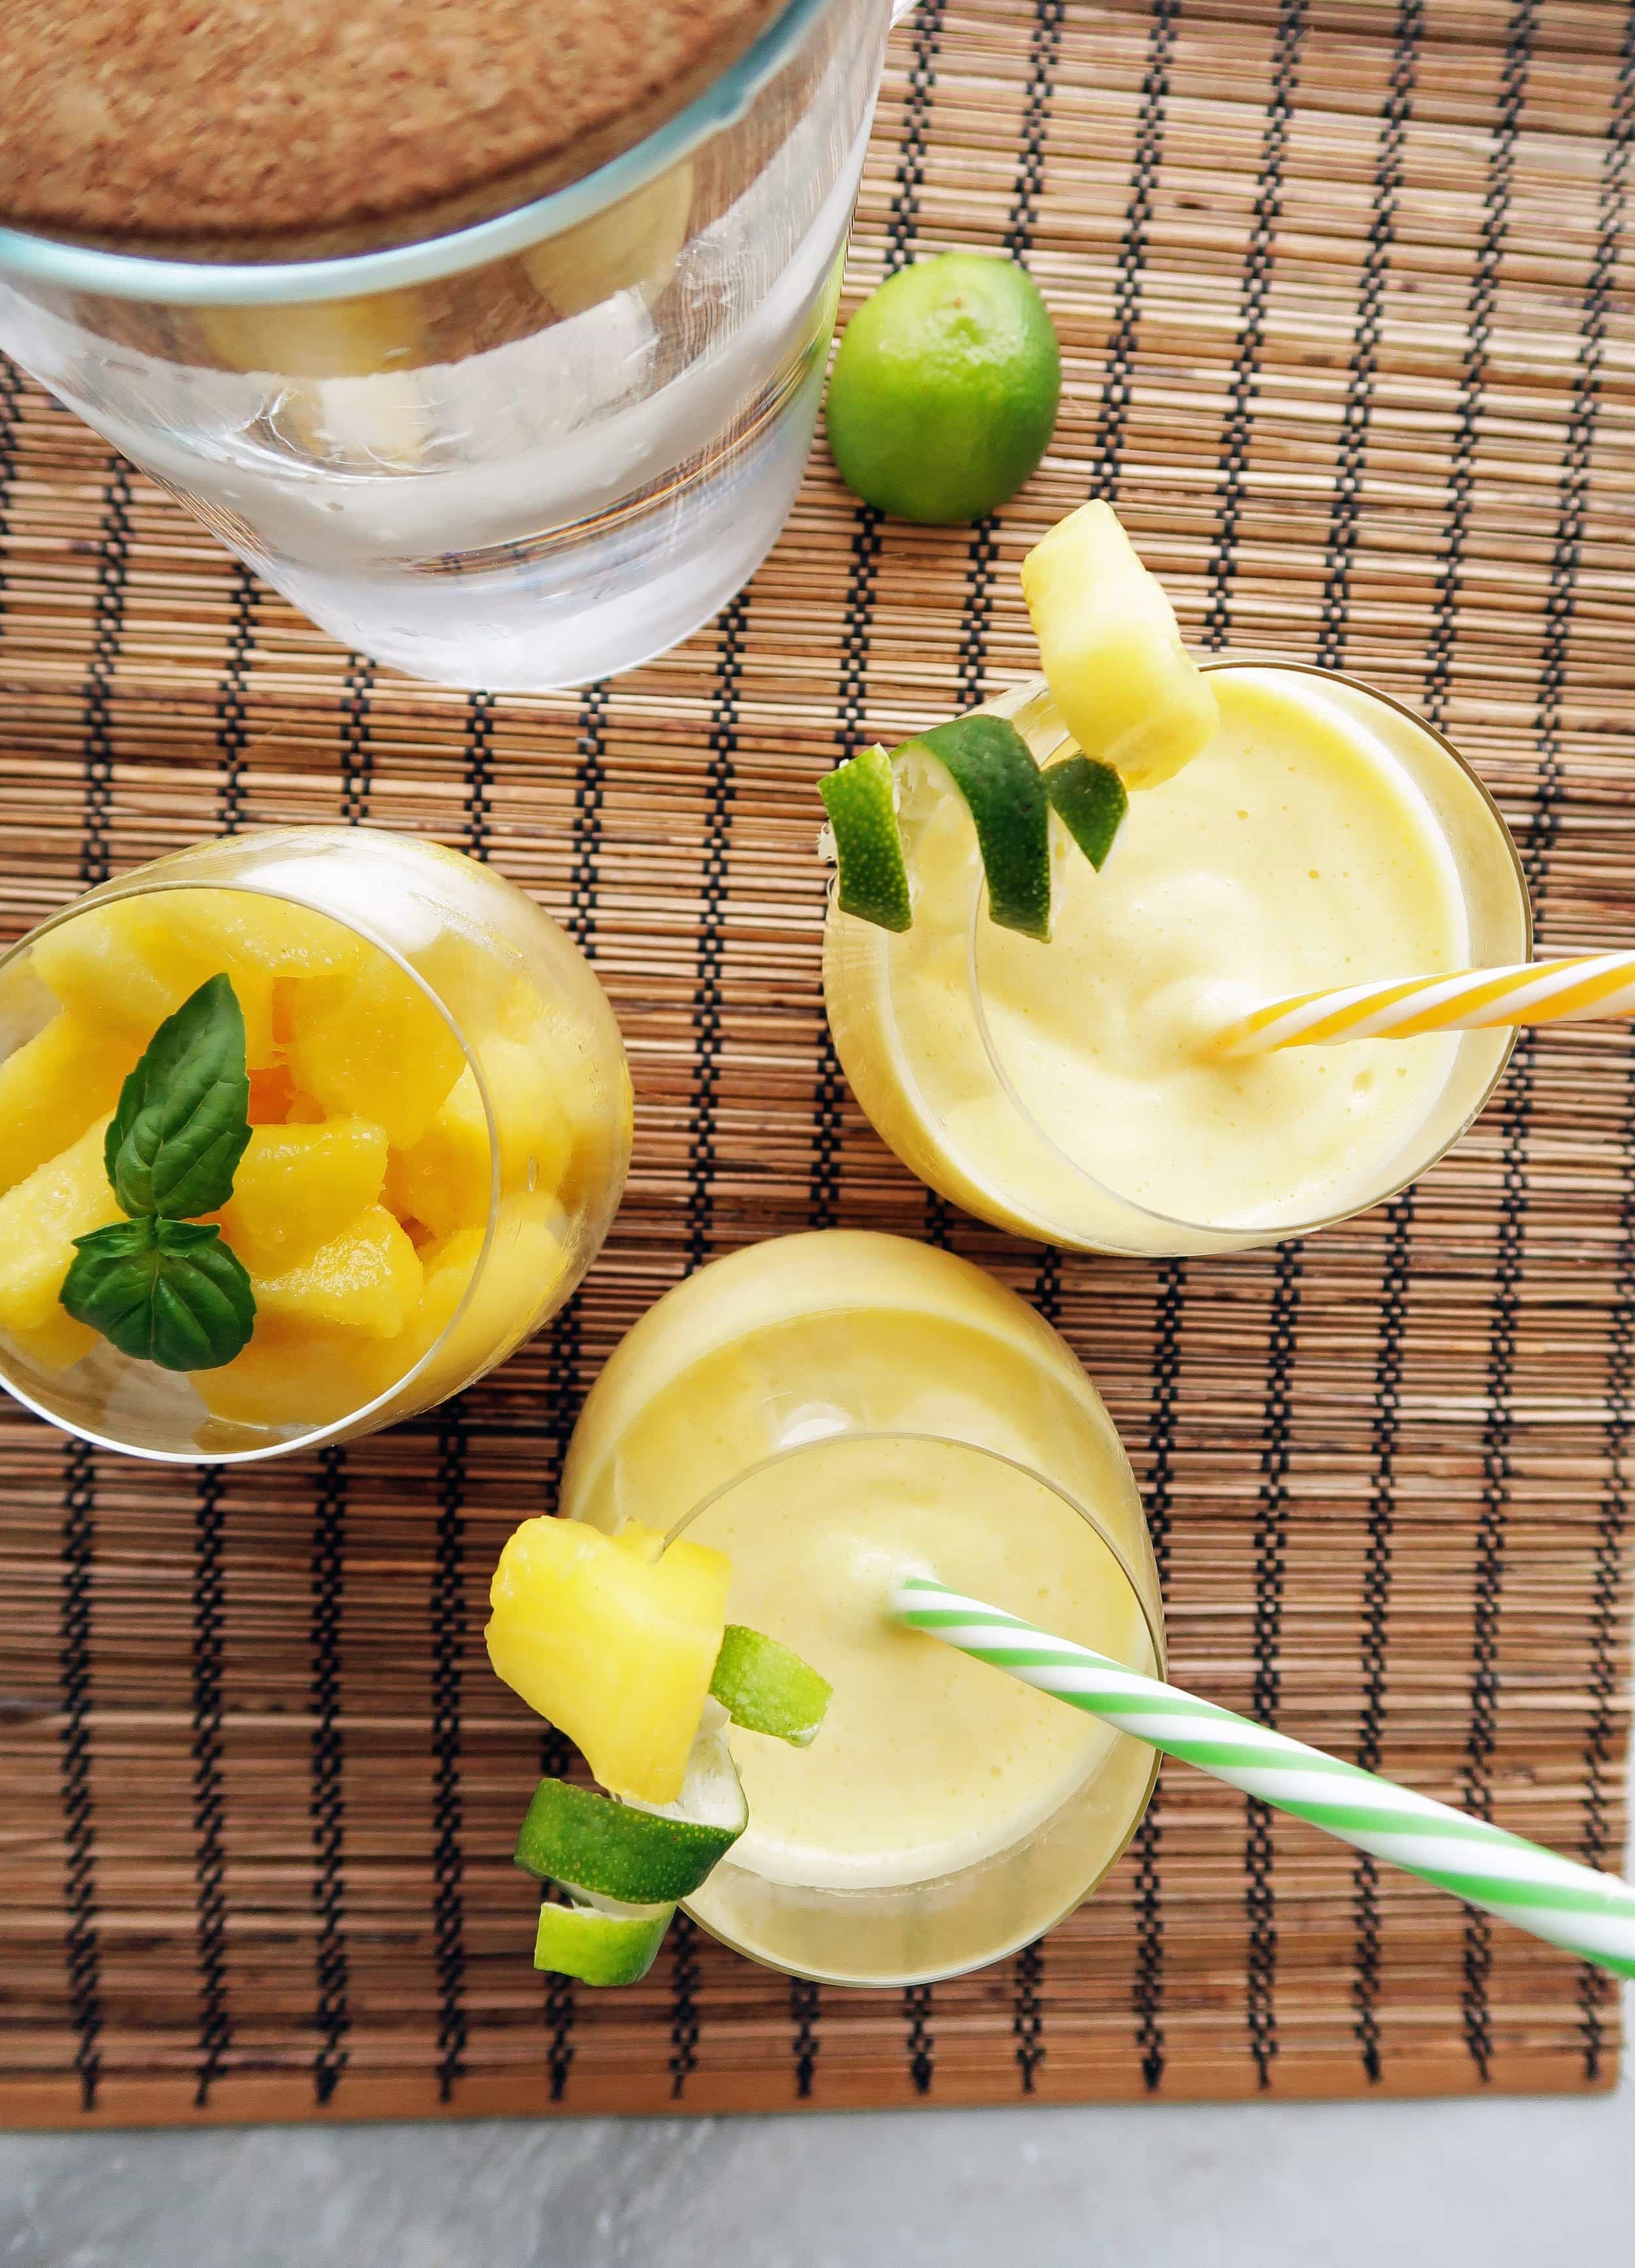 Overhead view of Pineapple Coconut Water Slushies in two glasses, pinepple slices in another glass, and a container of water.